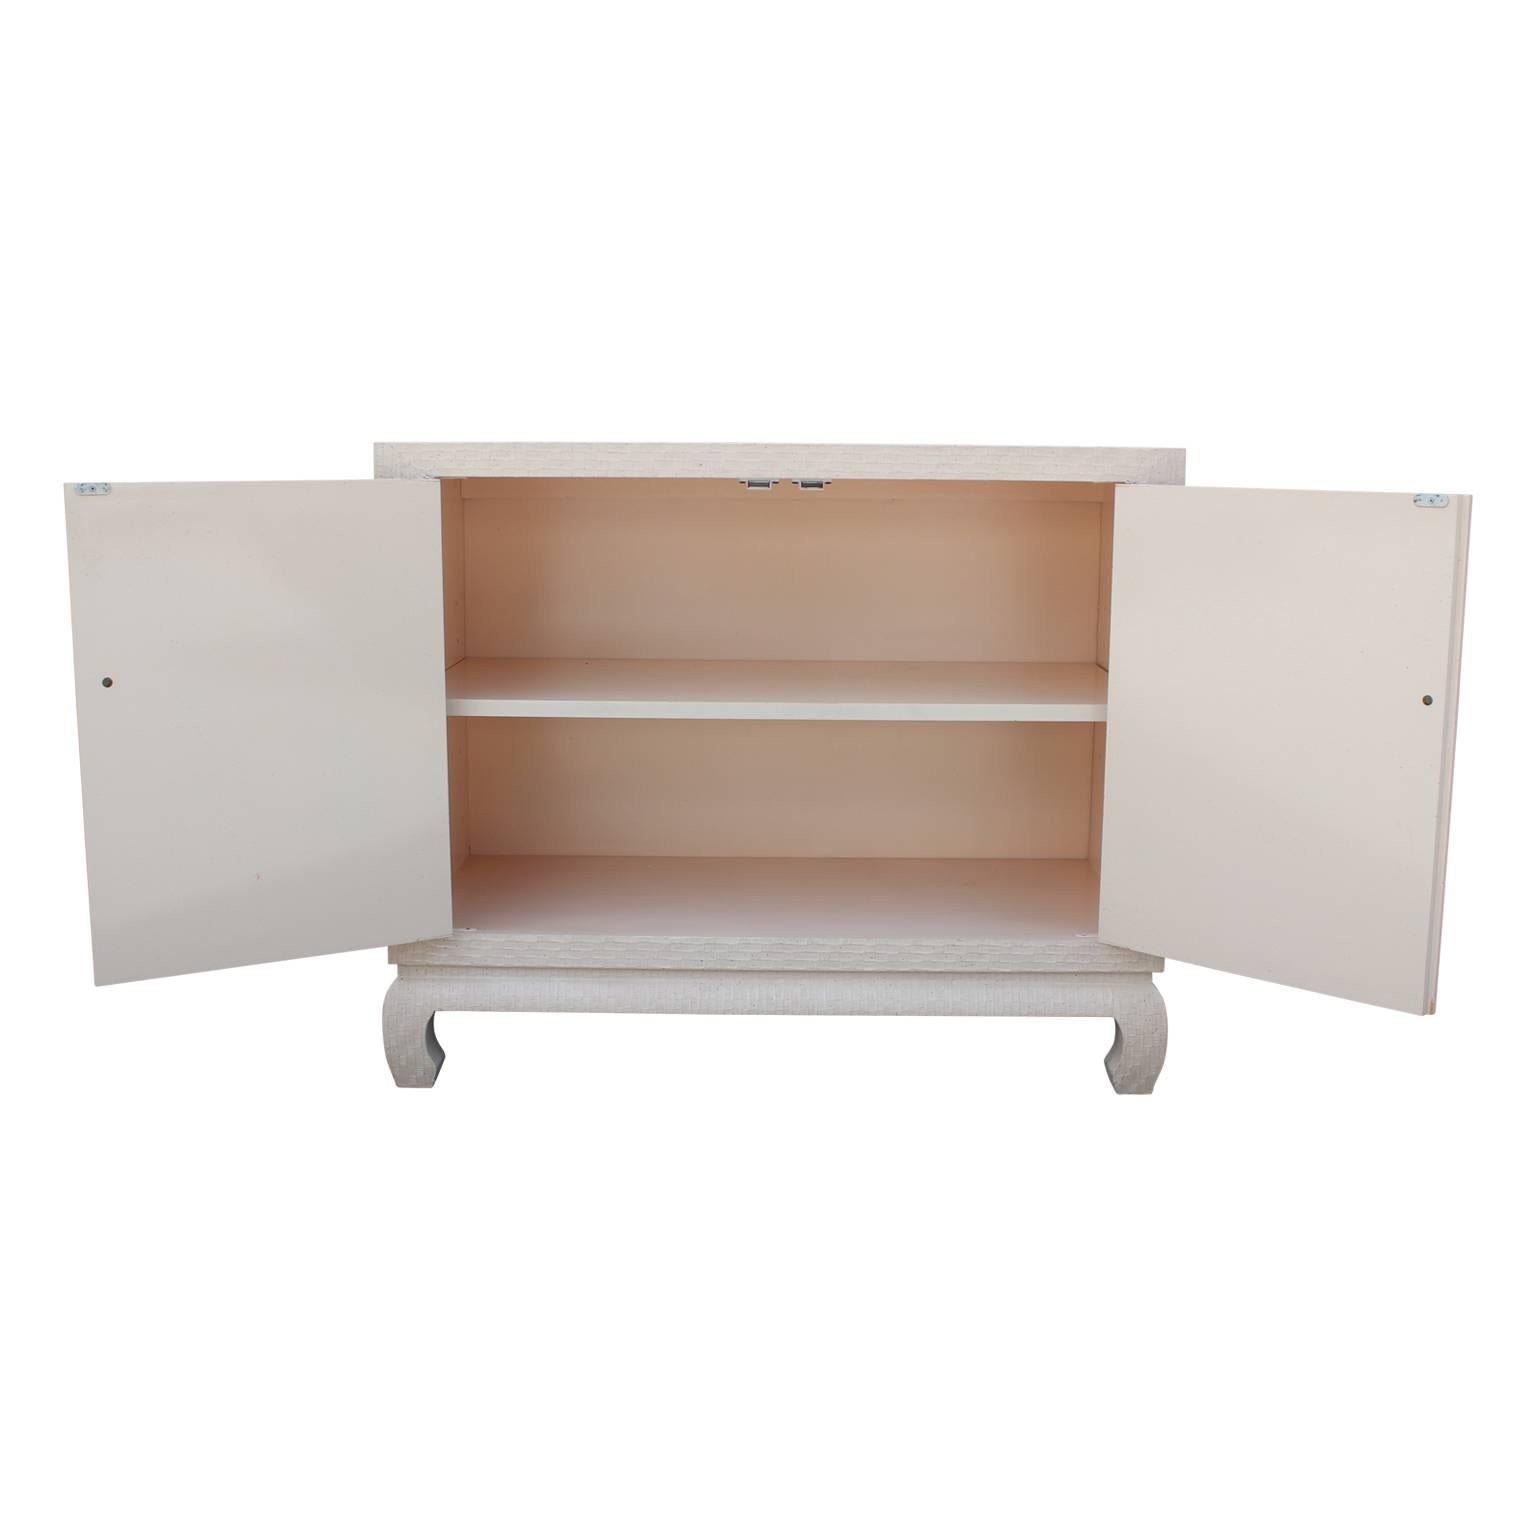 American Modern Baker Cabinet in Cream Lacquered Grass Cloth with Brass Pulls